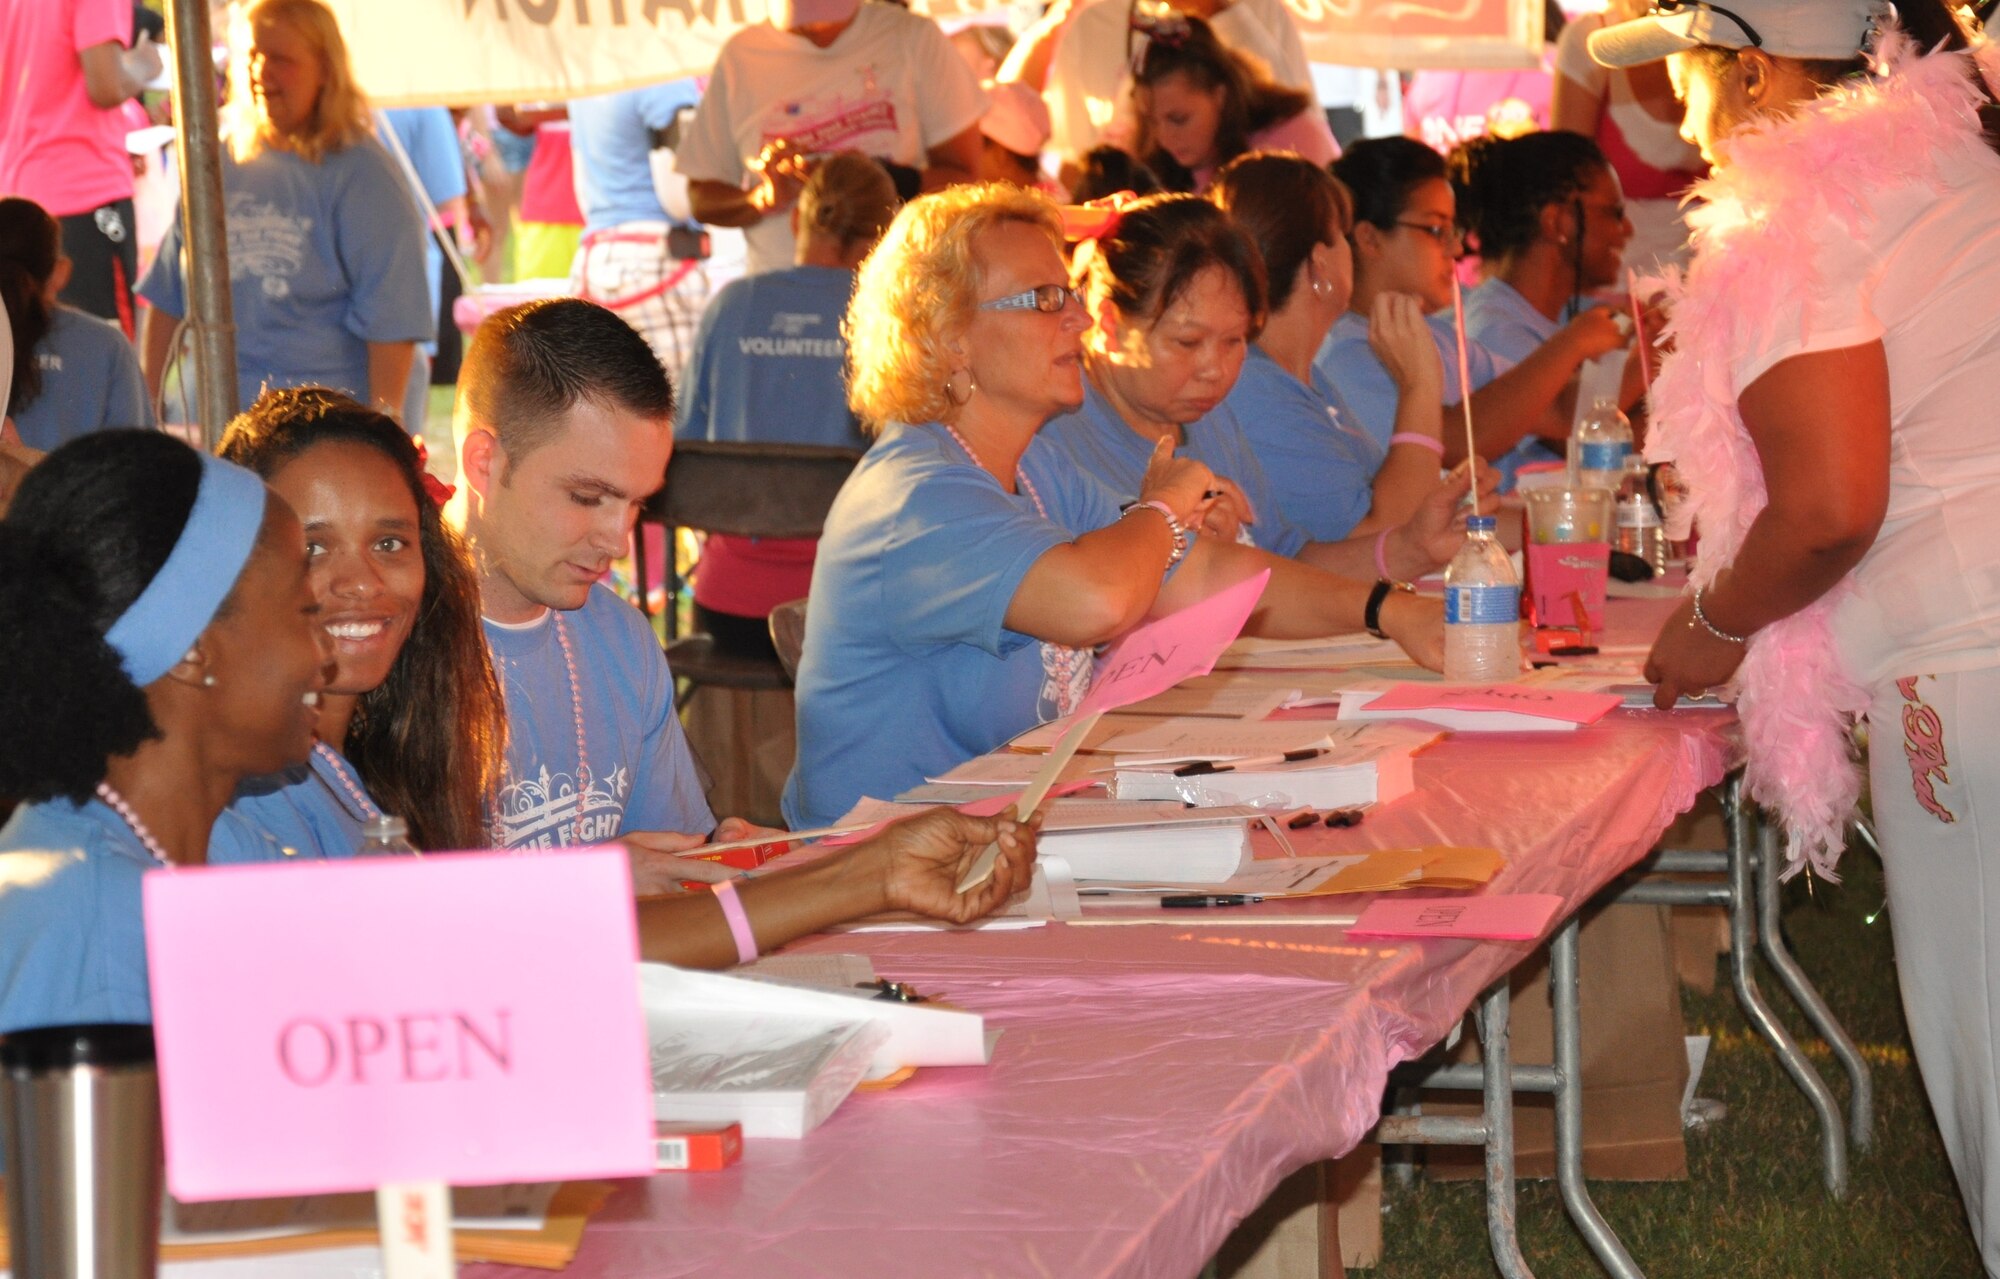 Volunteers from the 45th Space Wing work at the registration tent preparing participants in the Making Strides Against Breast Cancer walk at Space Coast Stadium Oct. 19, 2013. (U.S. Air Force photo/2nd Lt. Nelly Slaughter)